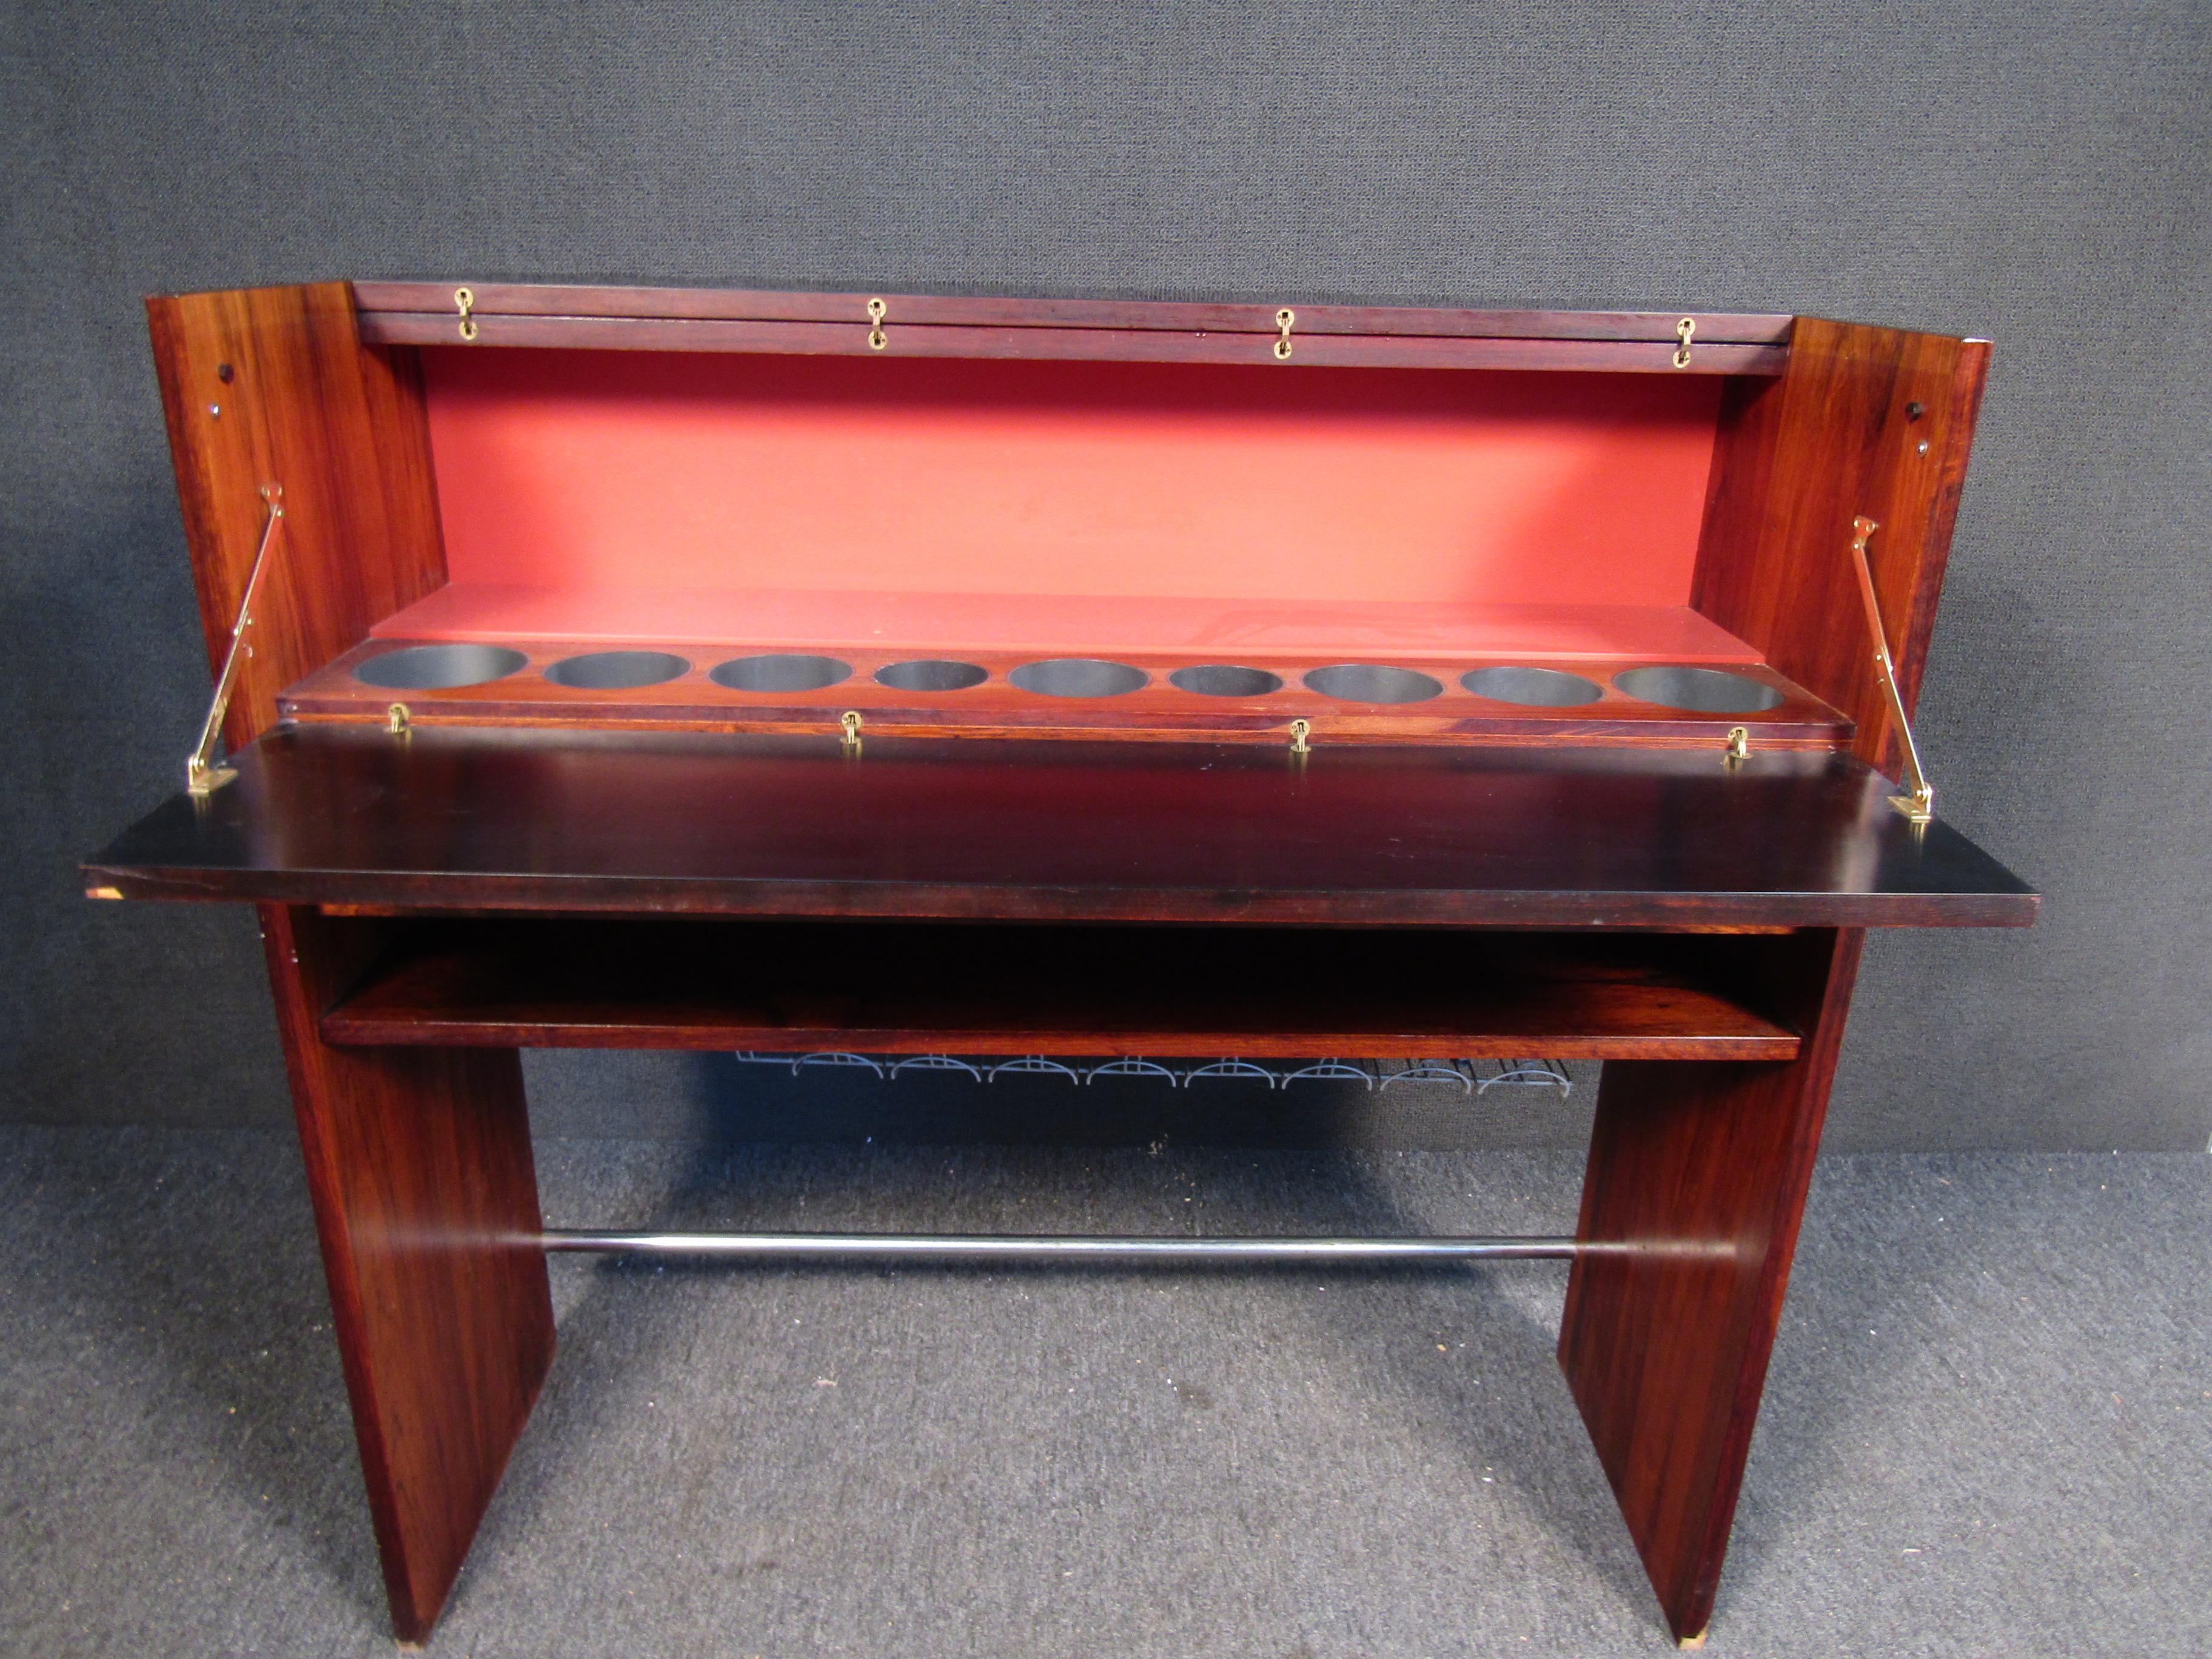 This vintage dry bar is built with vibrant rosewood and Mid-Century craftsmanship. Please confirm item location with seller (NY/NJ).